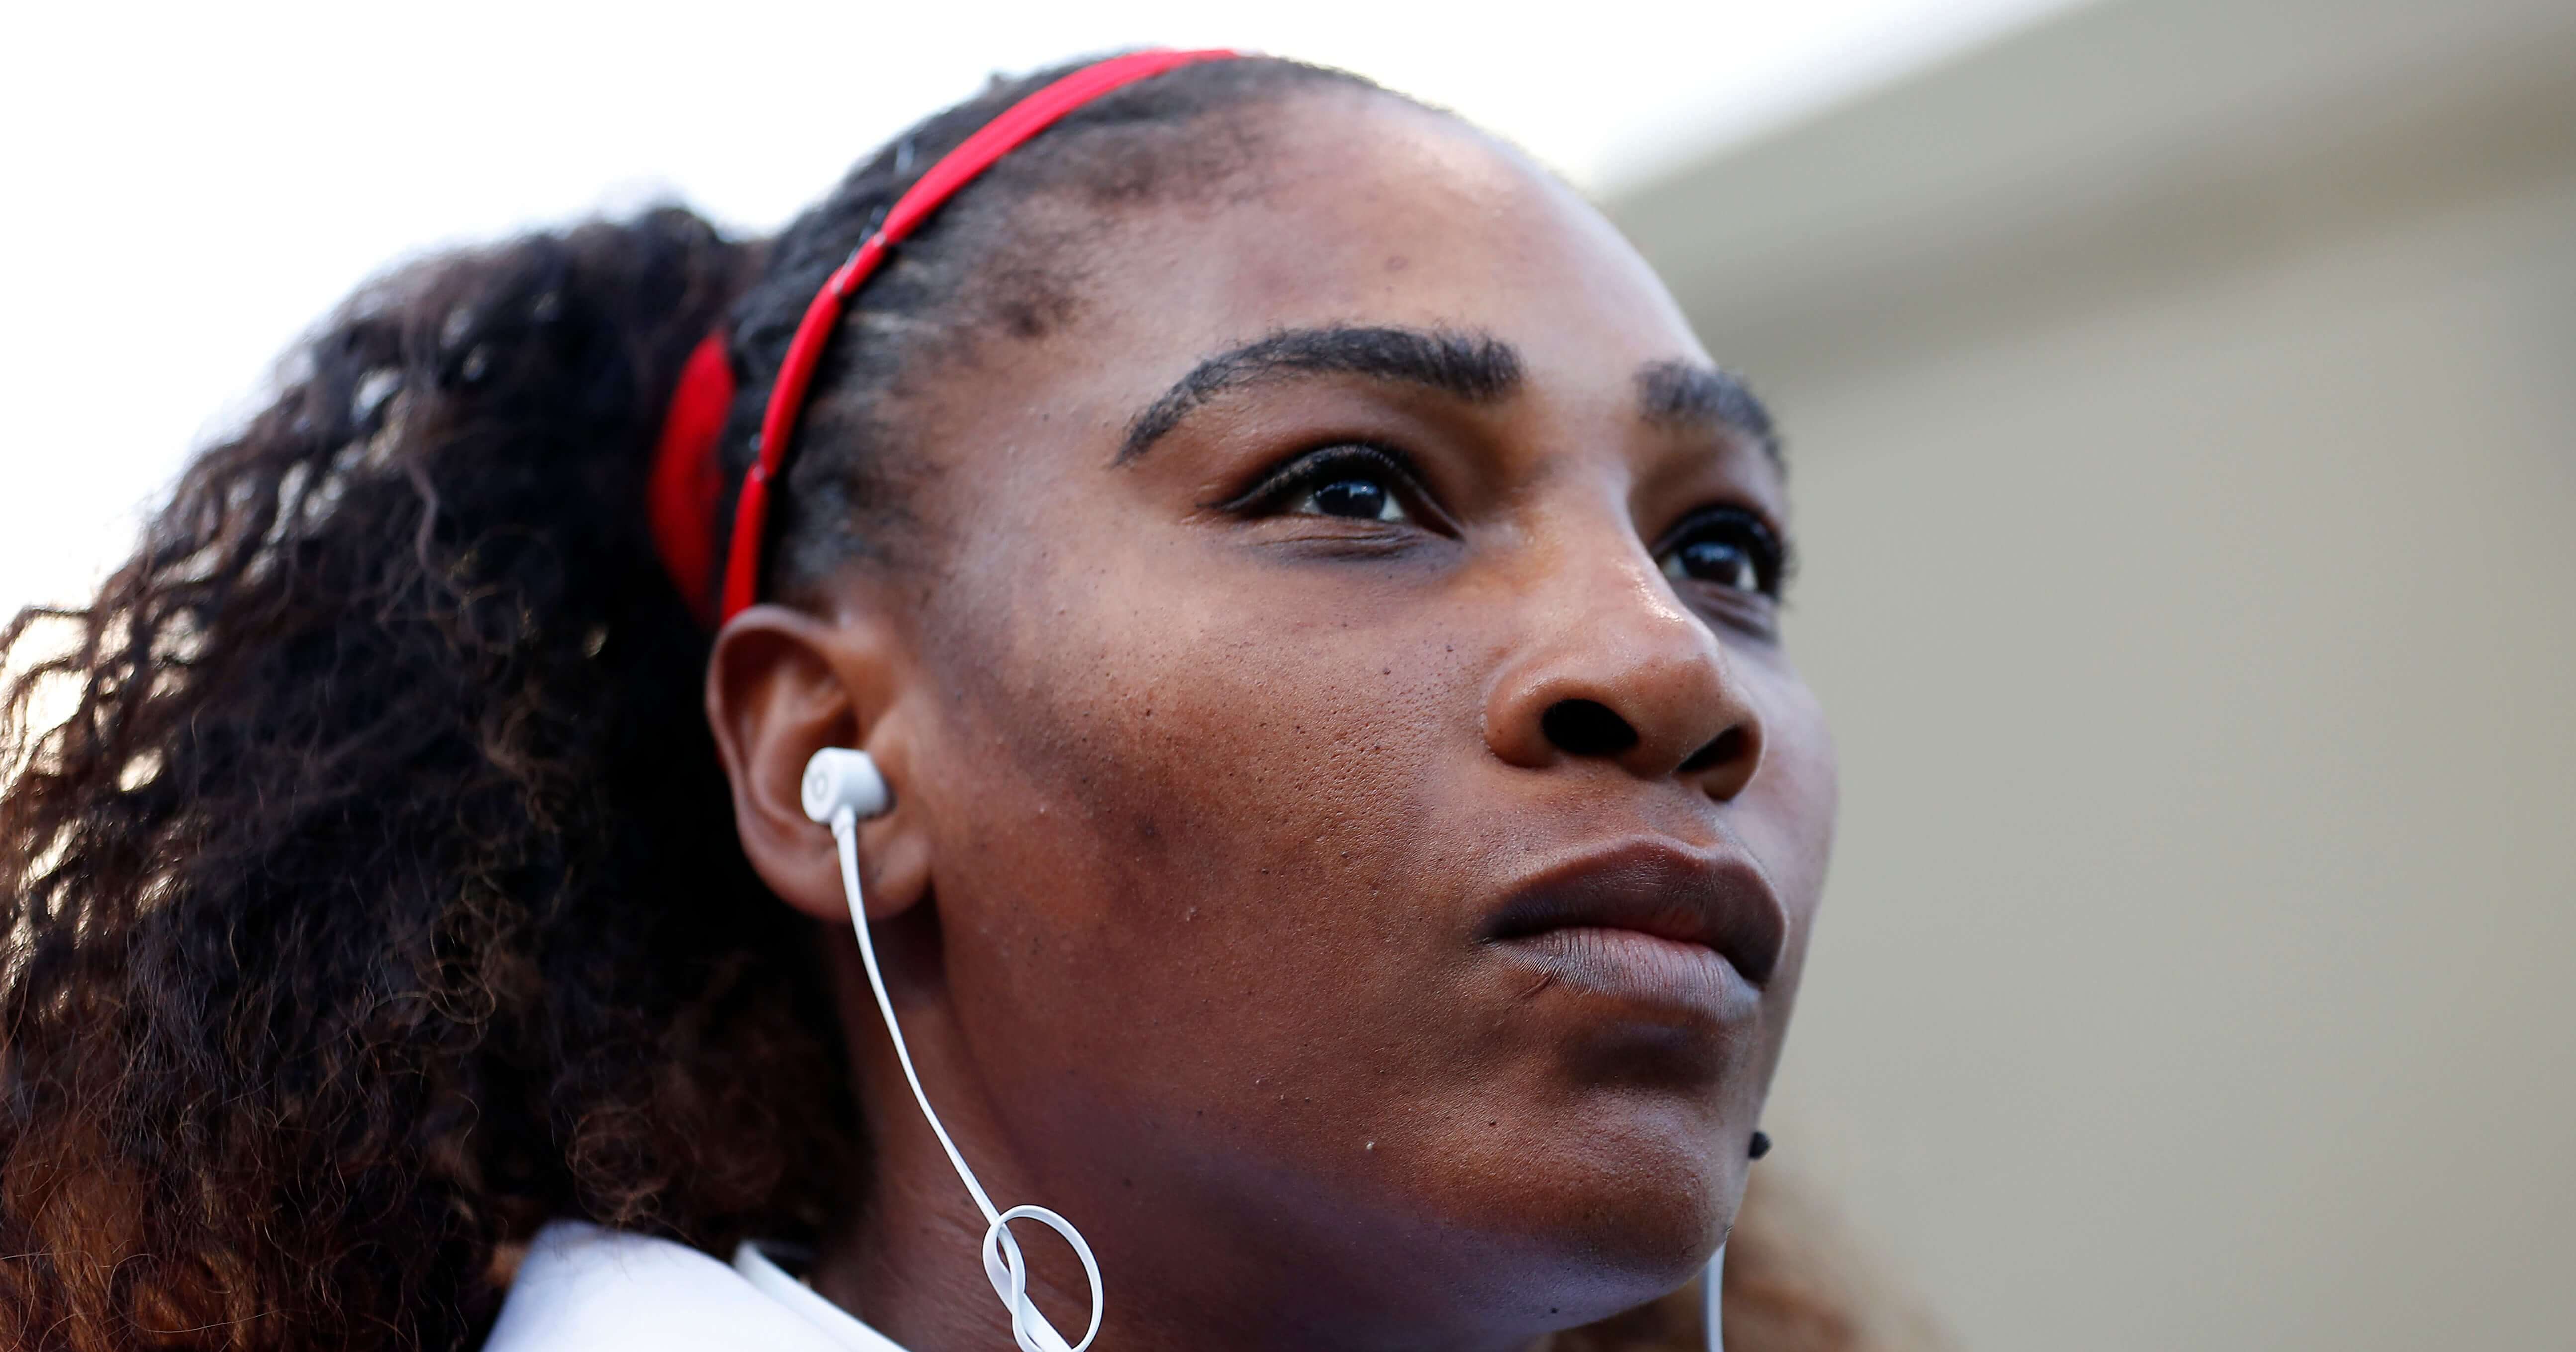 In this Tuesday, July 31, 2018, file photo, Serena Williams, of the United States, waits to walk onto the court before the match against Johanna Konta, from Britain, during the Mubadala Silicon Valley Classic tennis tournament in San Jose, Calif. Williams says she's been struggling with postpartum emotions and wants other new moms to know they are "totally normal."